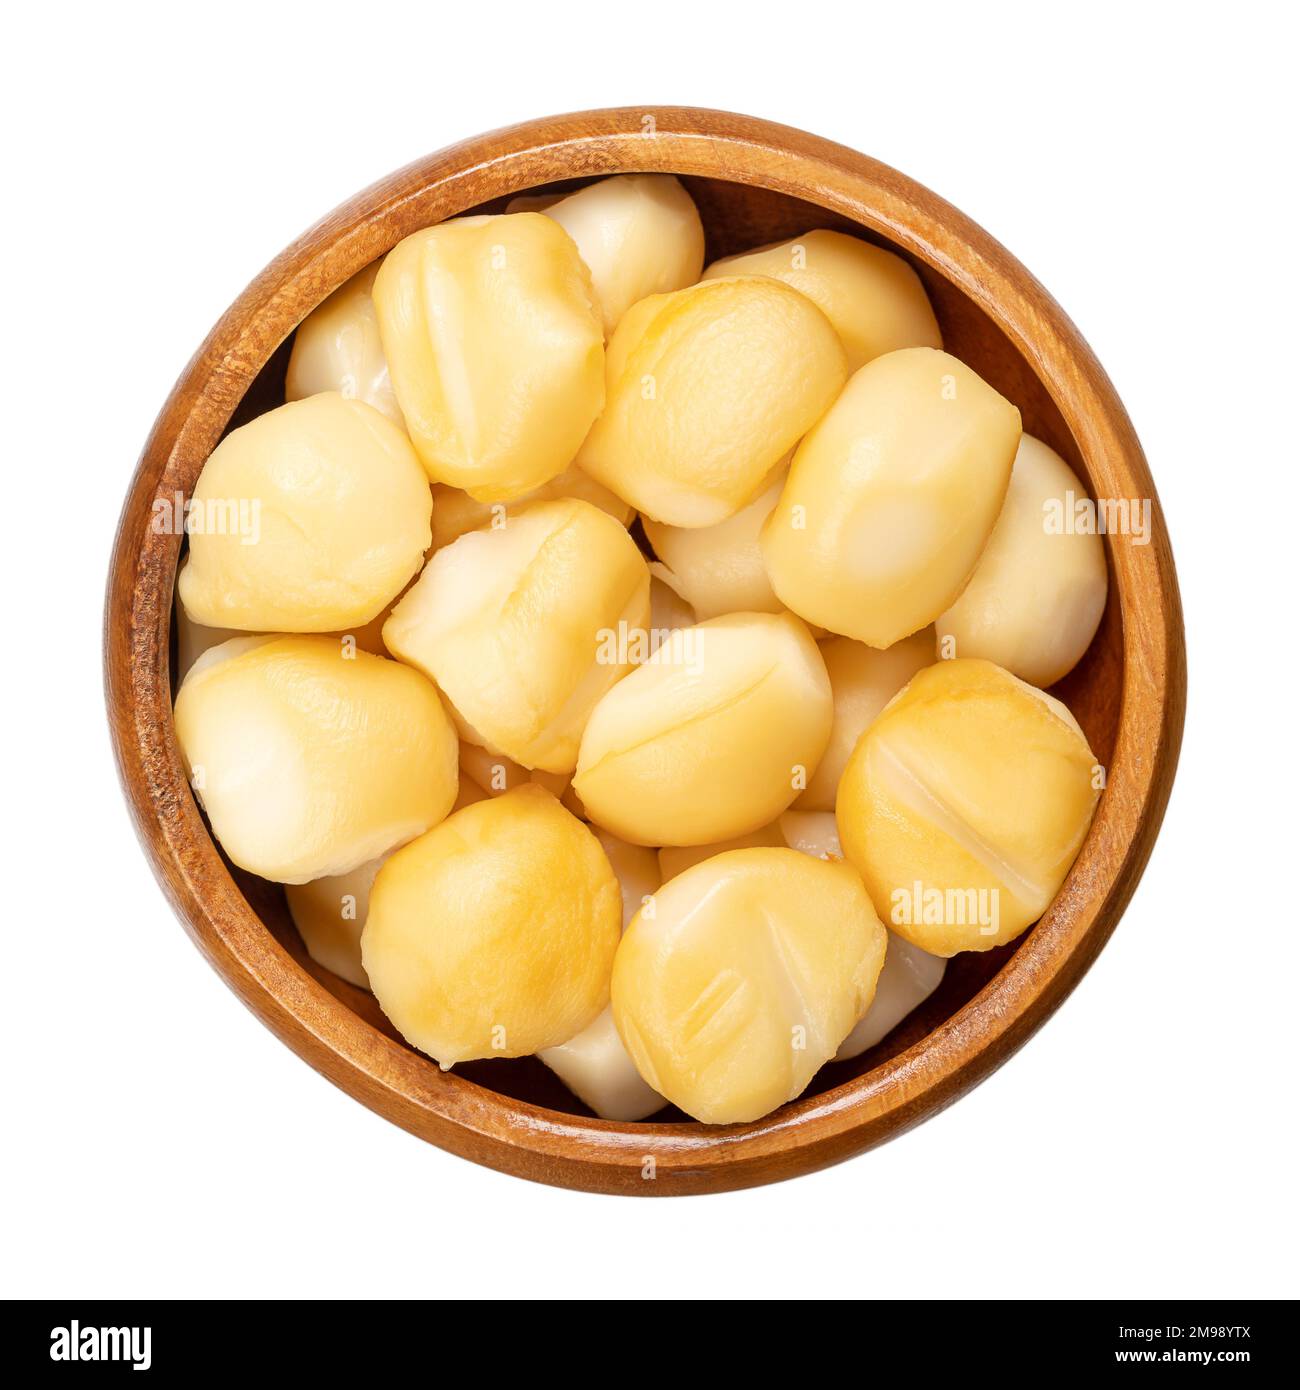 Mini spizzico of smoked scamorza, in a wooden bowl. Tiny morsels of Italian pasta filata, stretched curd cheese, with intense aroma and tawny color. Stock Photo